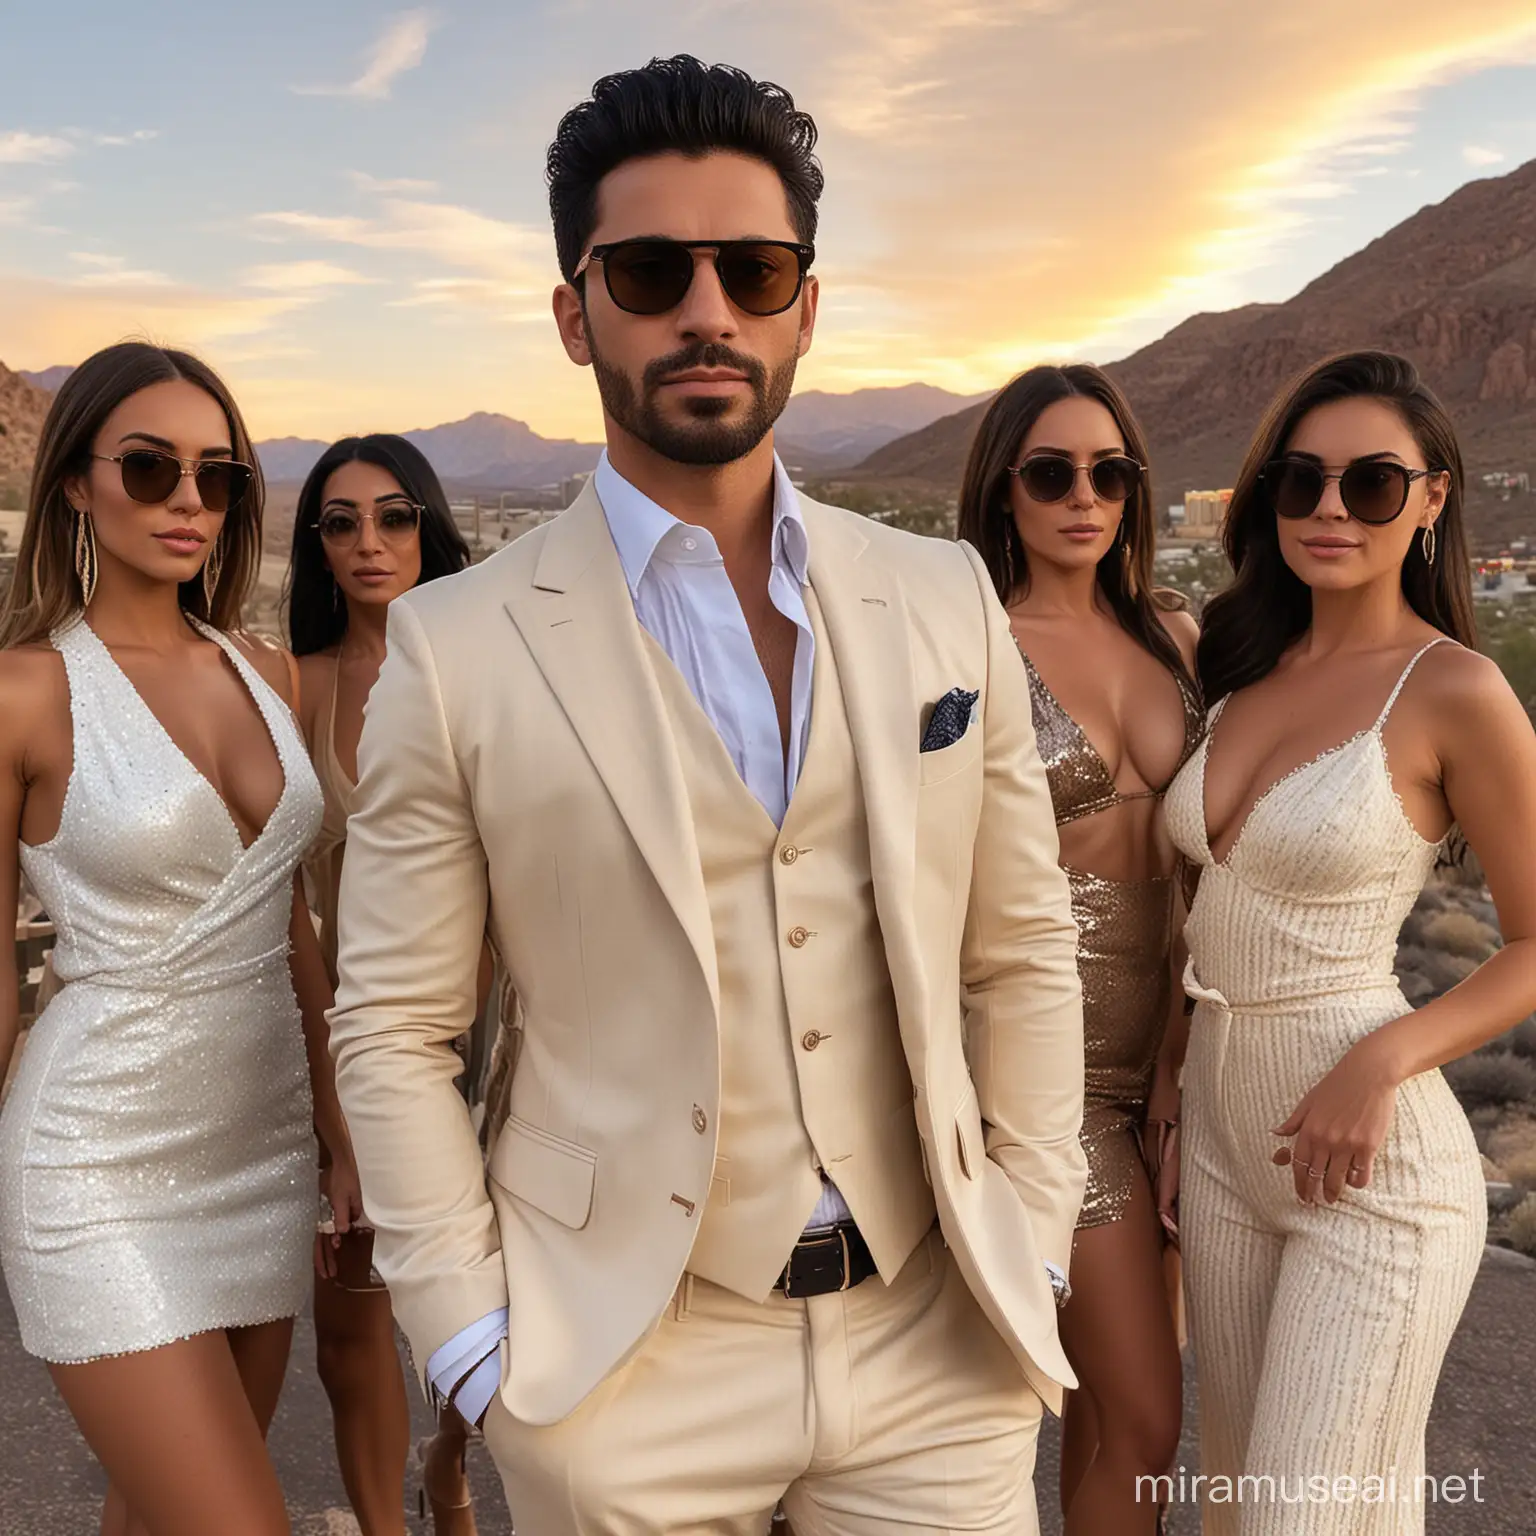 A handsome, wealthy man wearing a brown and cream suit, black sunglasses, black hair and a light beard, with a group of sexy women next to him and a sunset view in a mountainous area like Las Vegas.